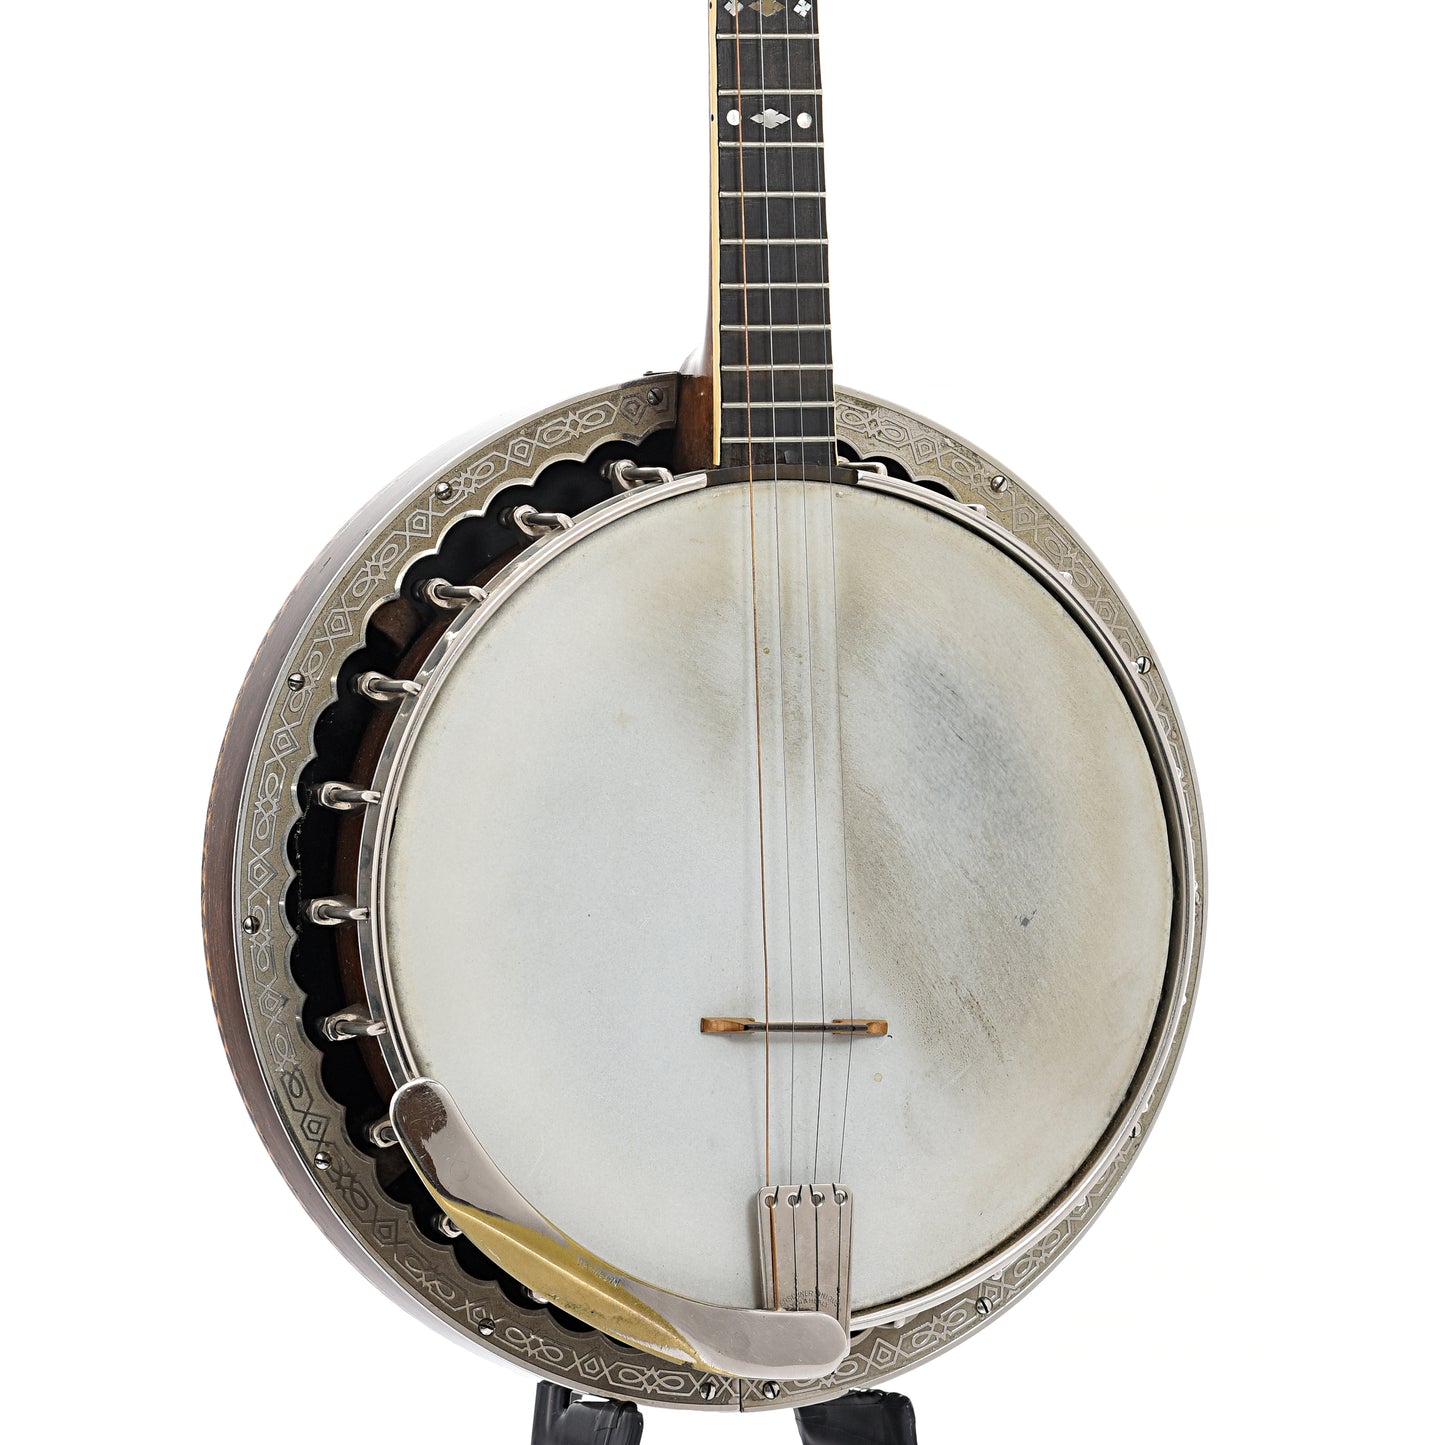 Front and side of Washburn Style 5177 "Dasant" Tenor Banjo 